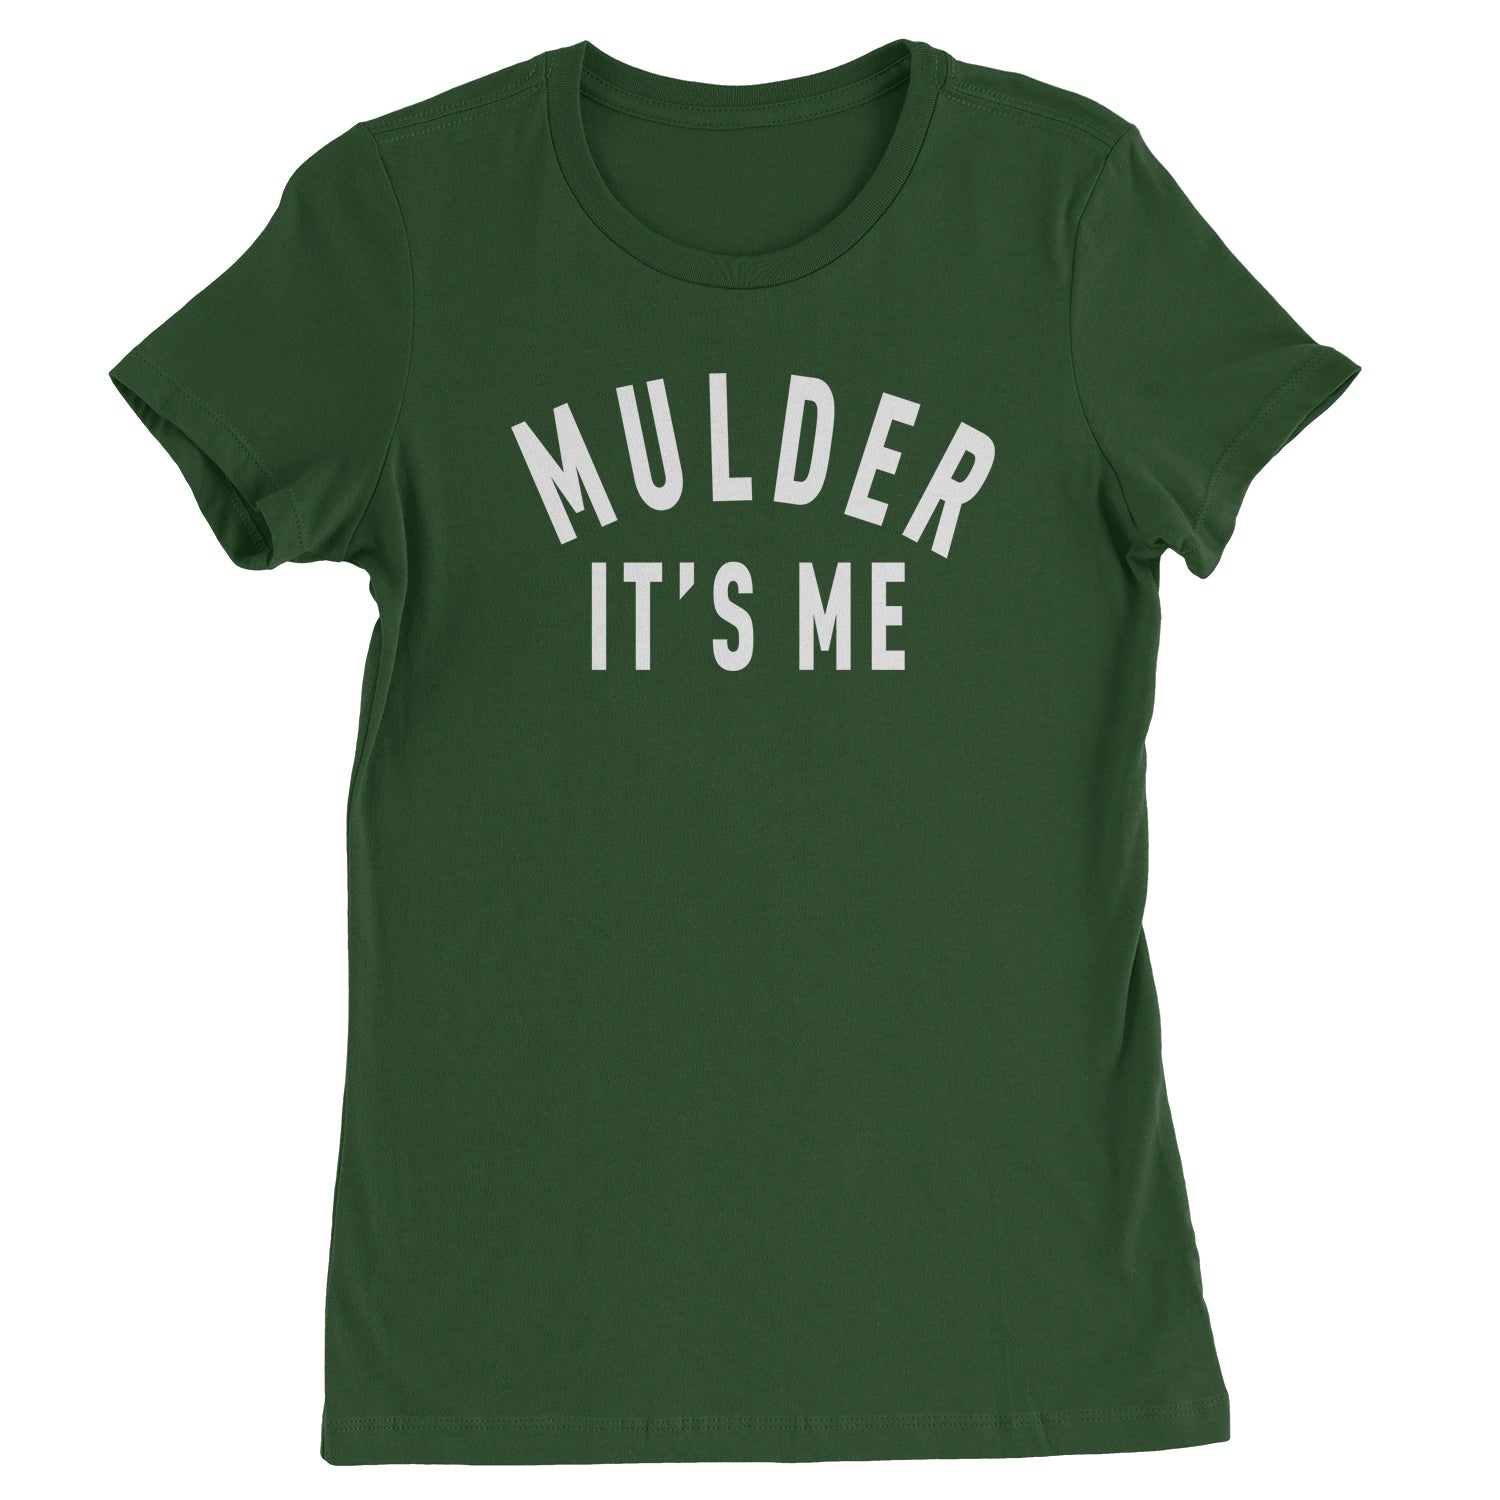 Mulder, It's Me Womens T-shirt 51, area, believe, files, is, mulder, out, scully, the, there, truth, x, xfiles by Expression Tees